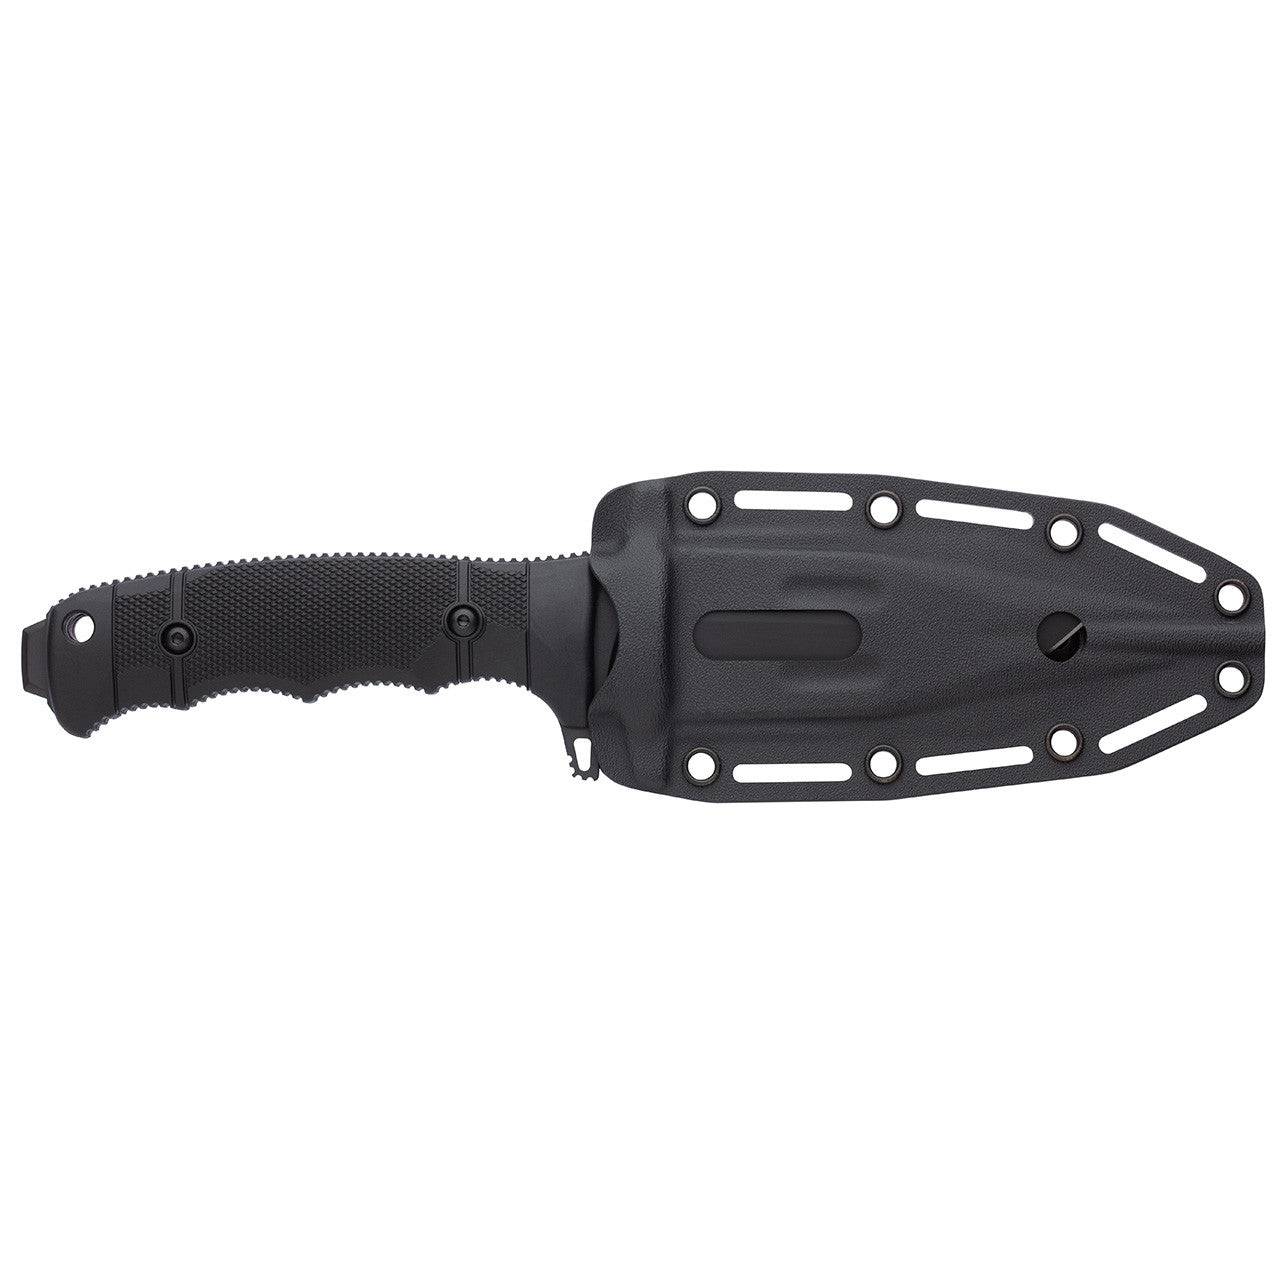 SOG Seal FX Fixed Blade Knife, Clip Point, Serrated, Black #17-21-01-57